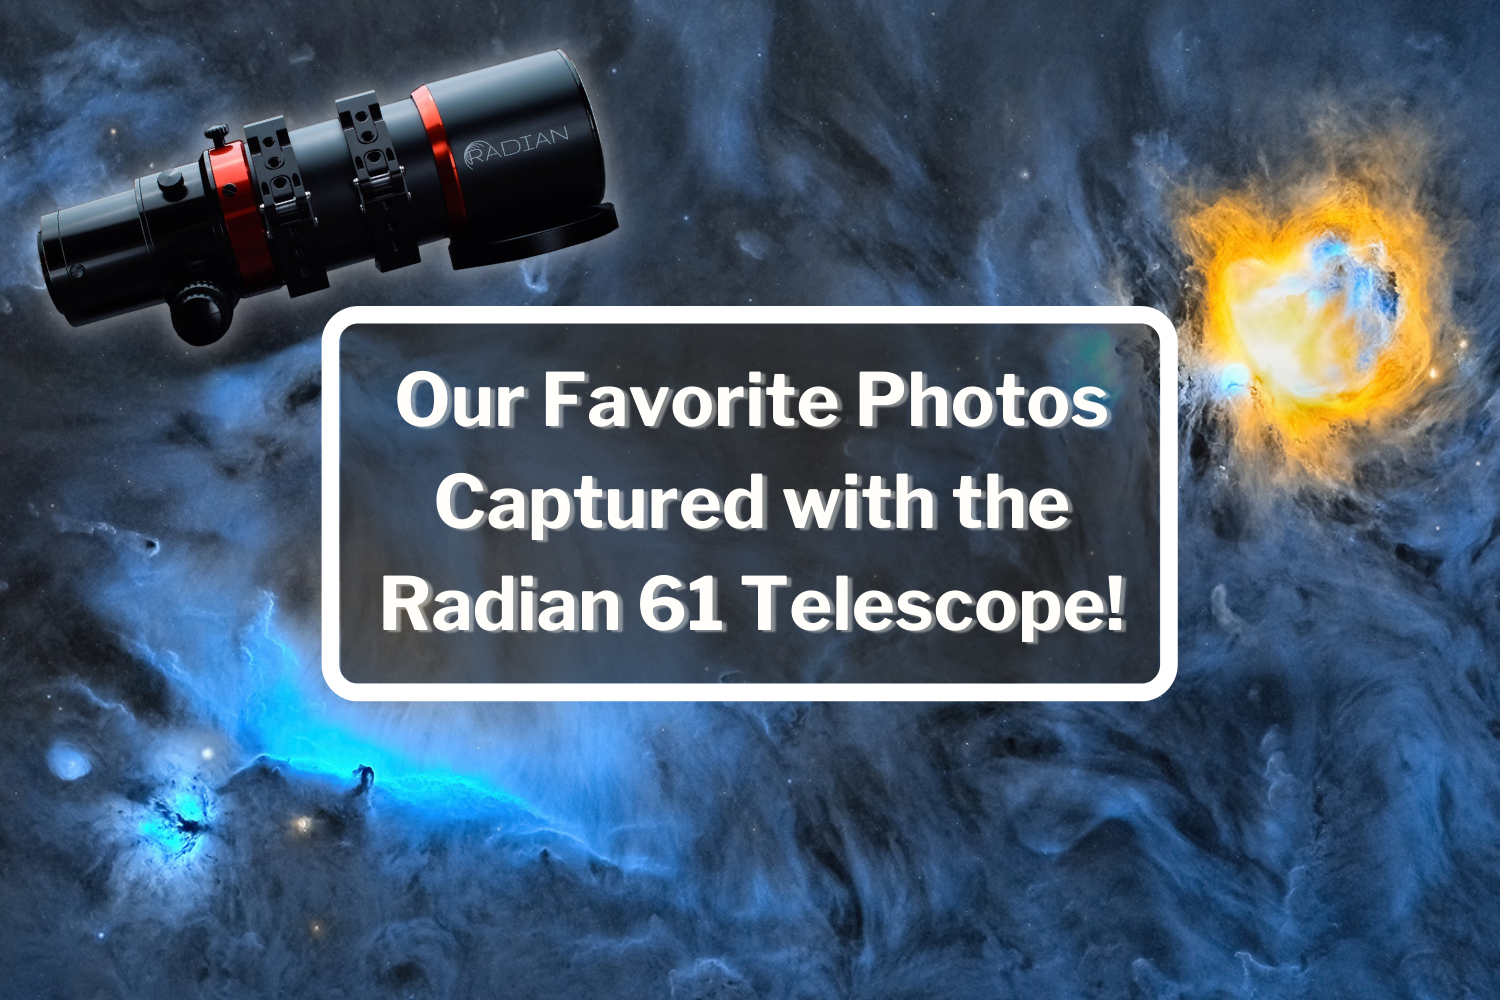 Our Favorite Photos Captured with the Radian 61 Telescope! (So Far)